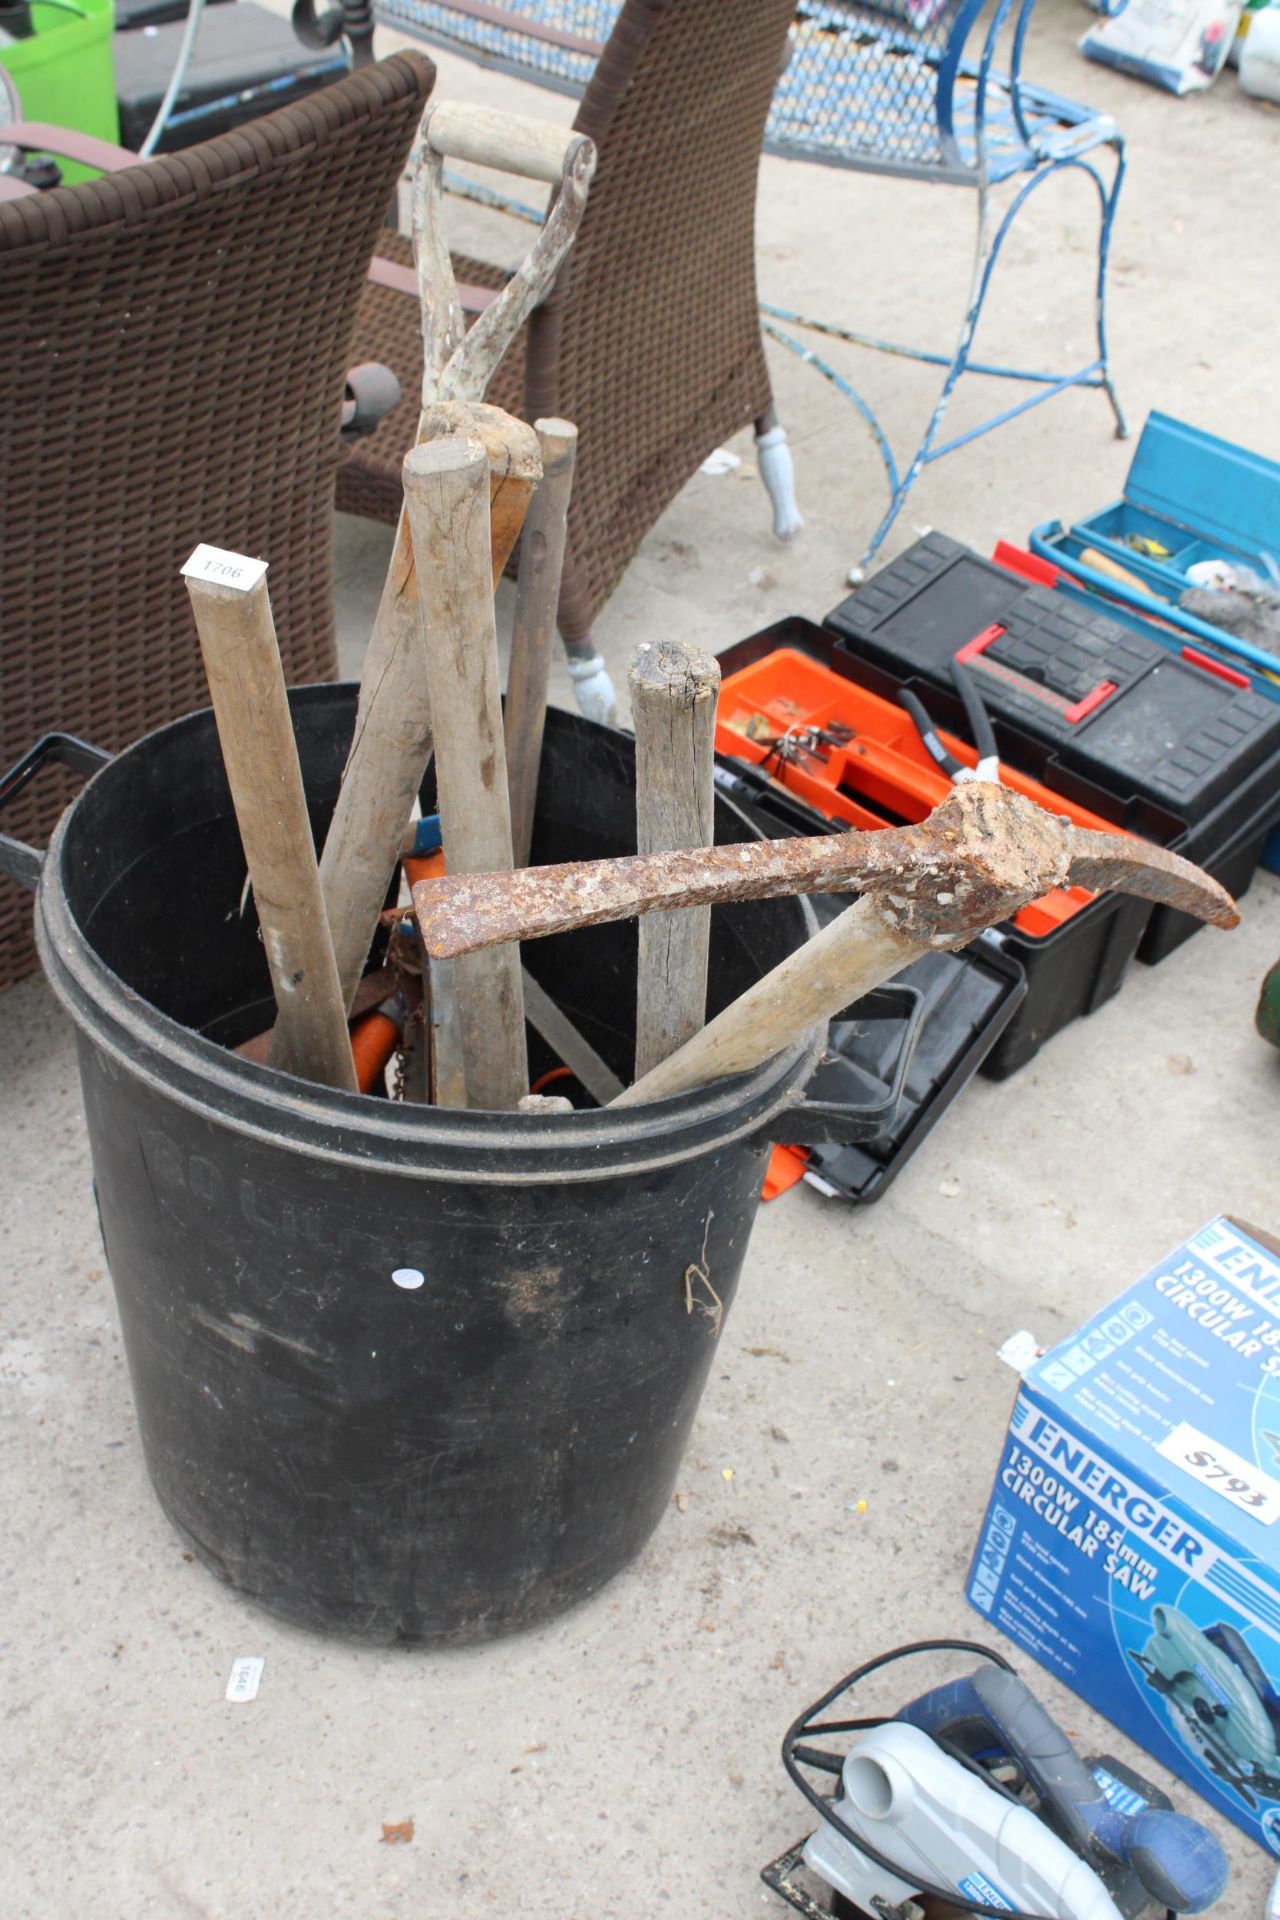 A PLASTIC BIN WITH AN ASSORTMENT OF TOOLS TO INCLUDE A PICK AXE AND A SHOVEL ETC